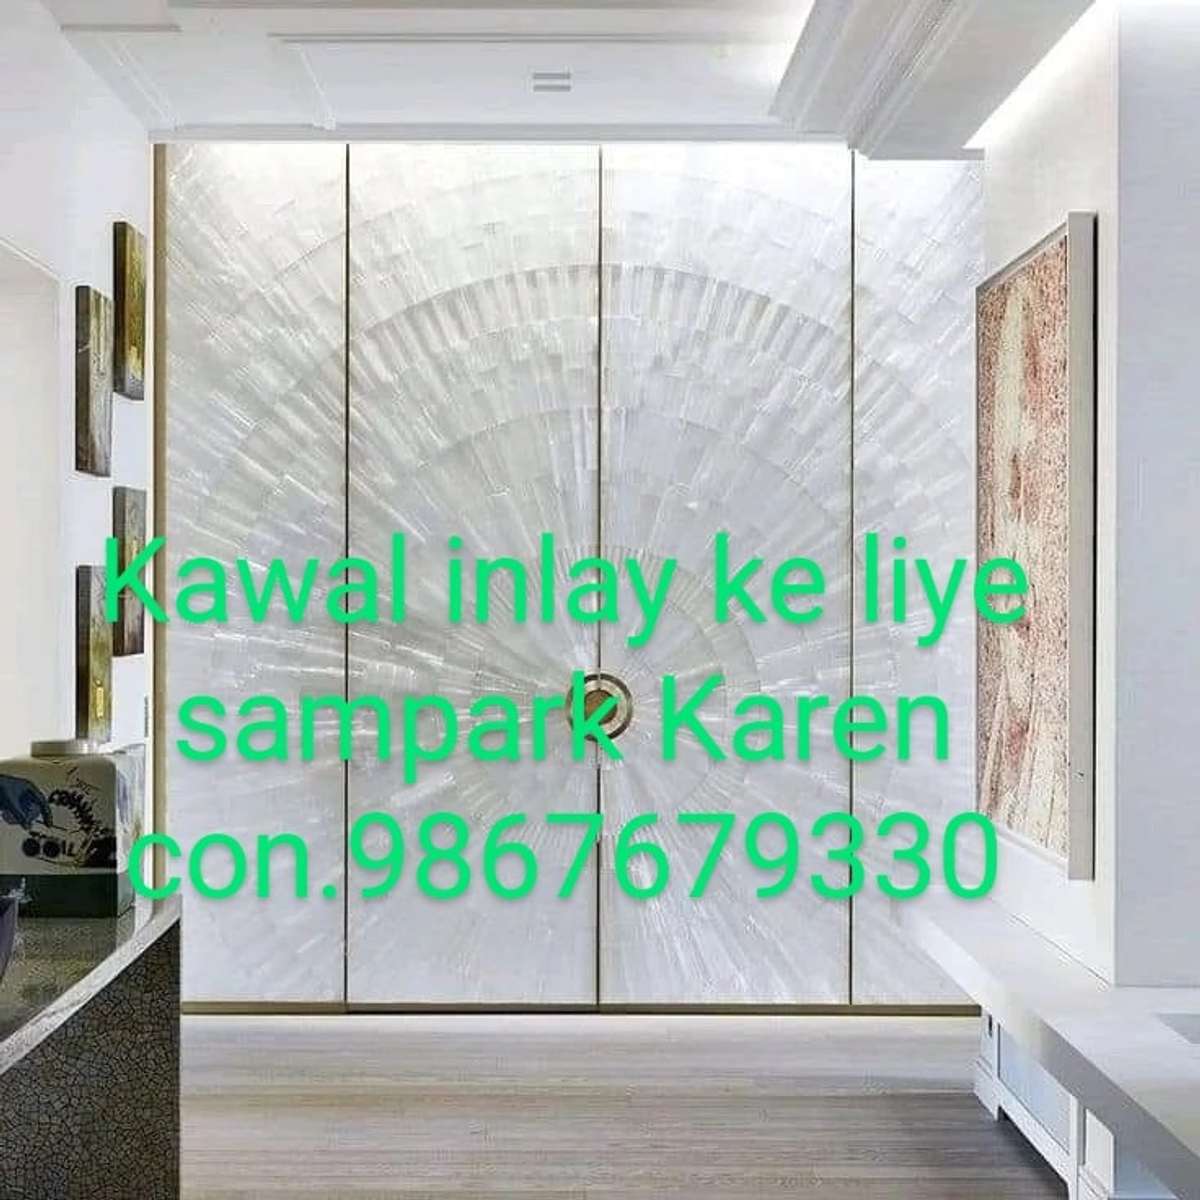 indian inlay art.exclusive interior products-solid surfaces,alabaster,mother of pearl,semi precious stones,wooden logs... contact 9867679330